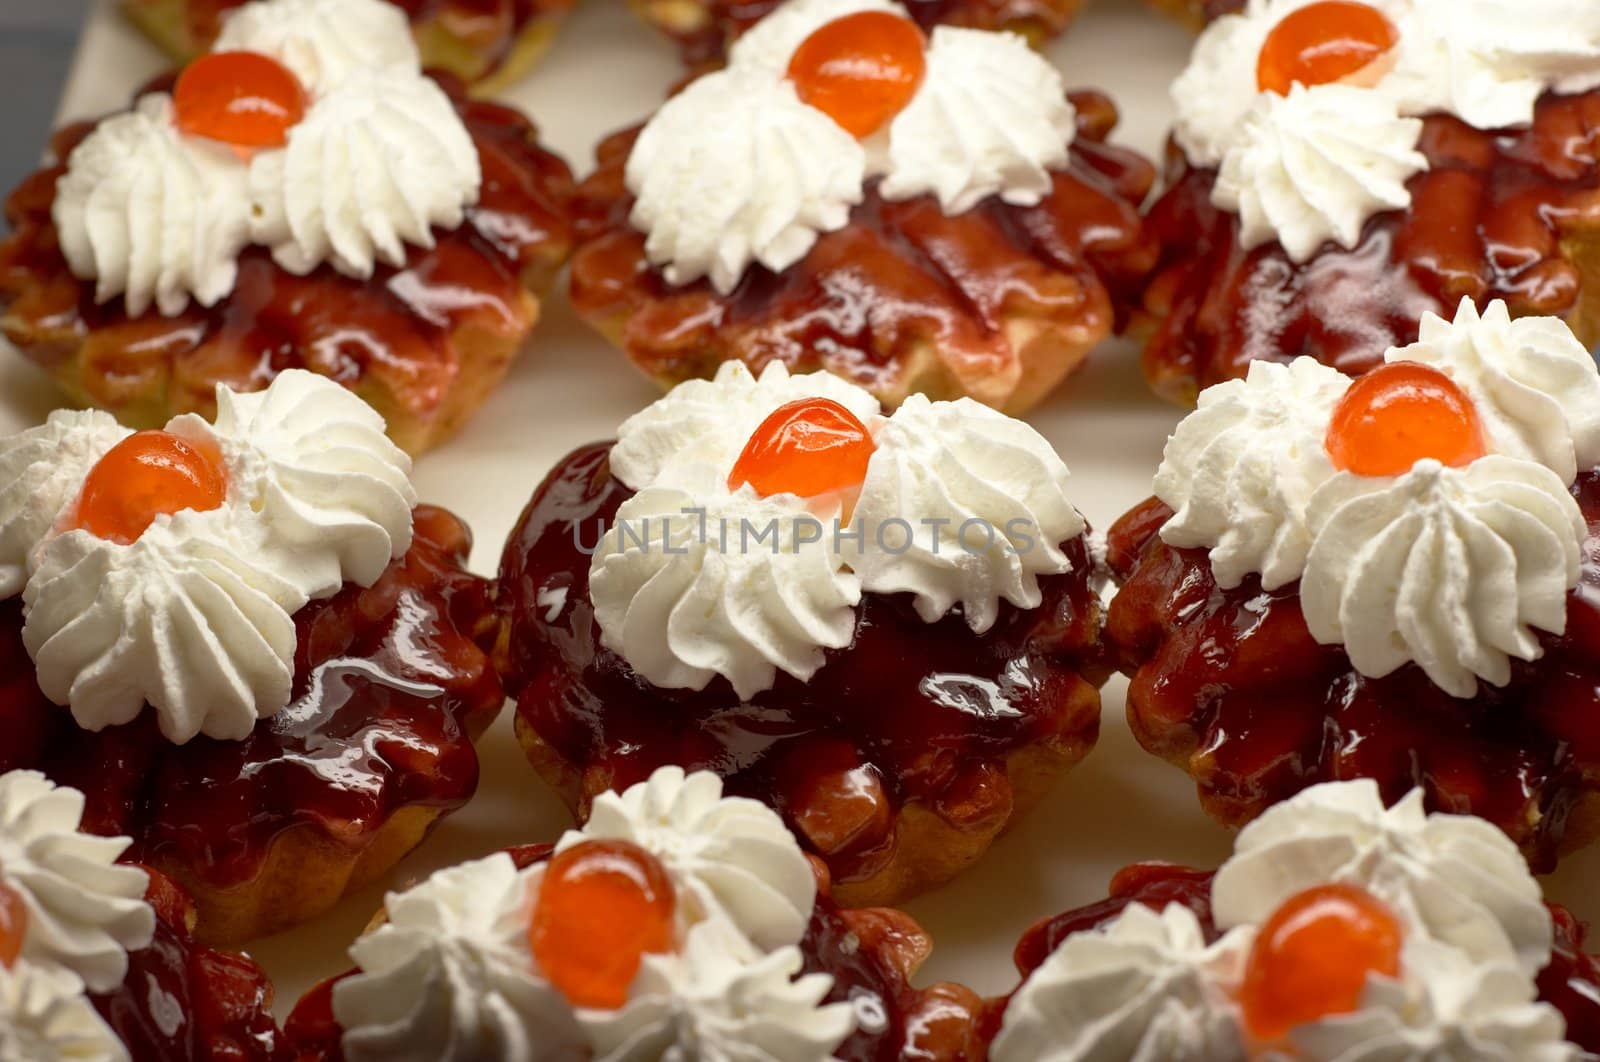 Small cupcakes with white cream and cherry on top. Shallow DOF.